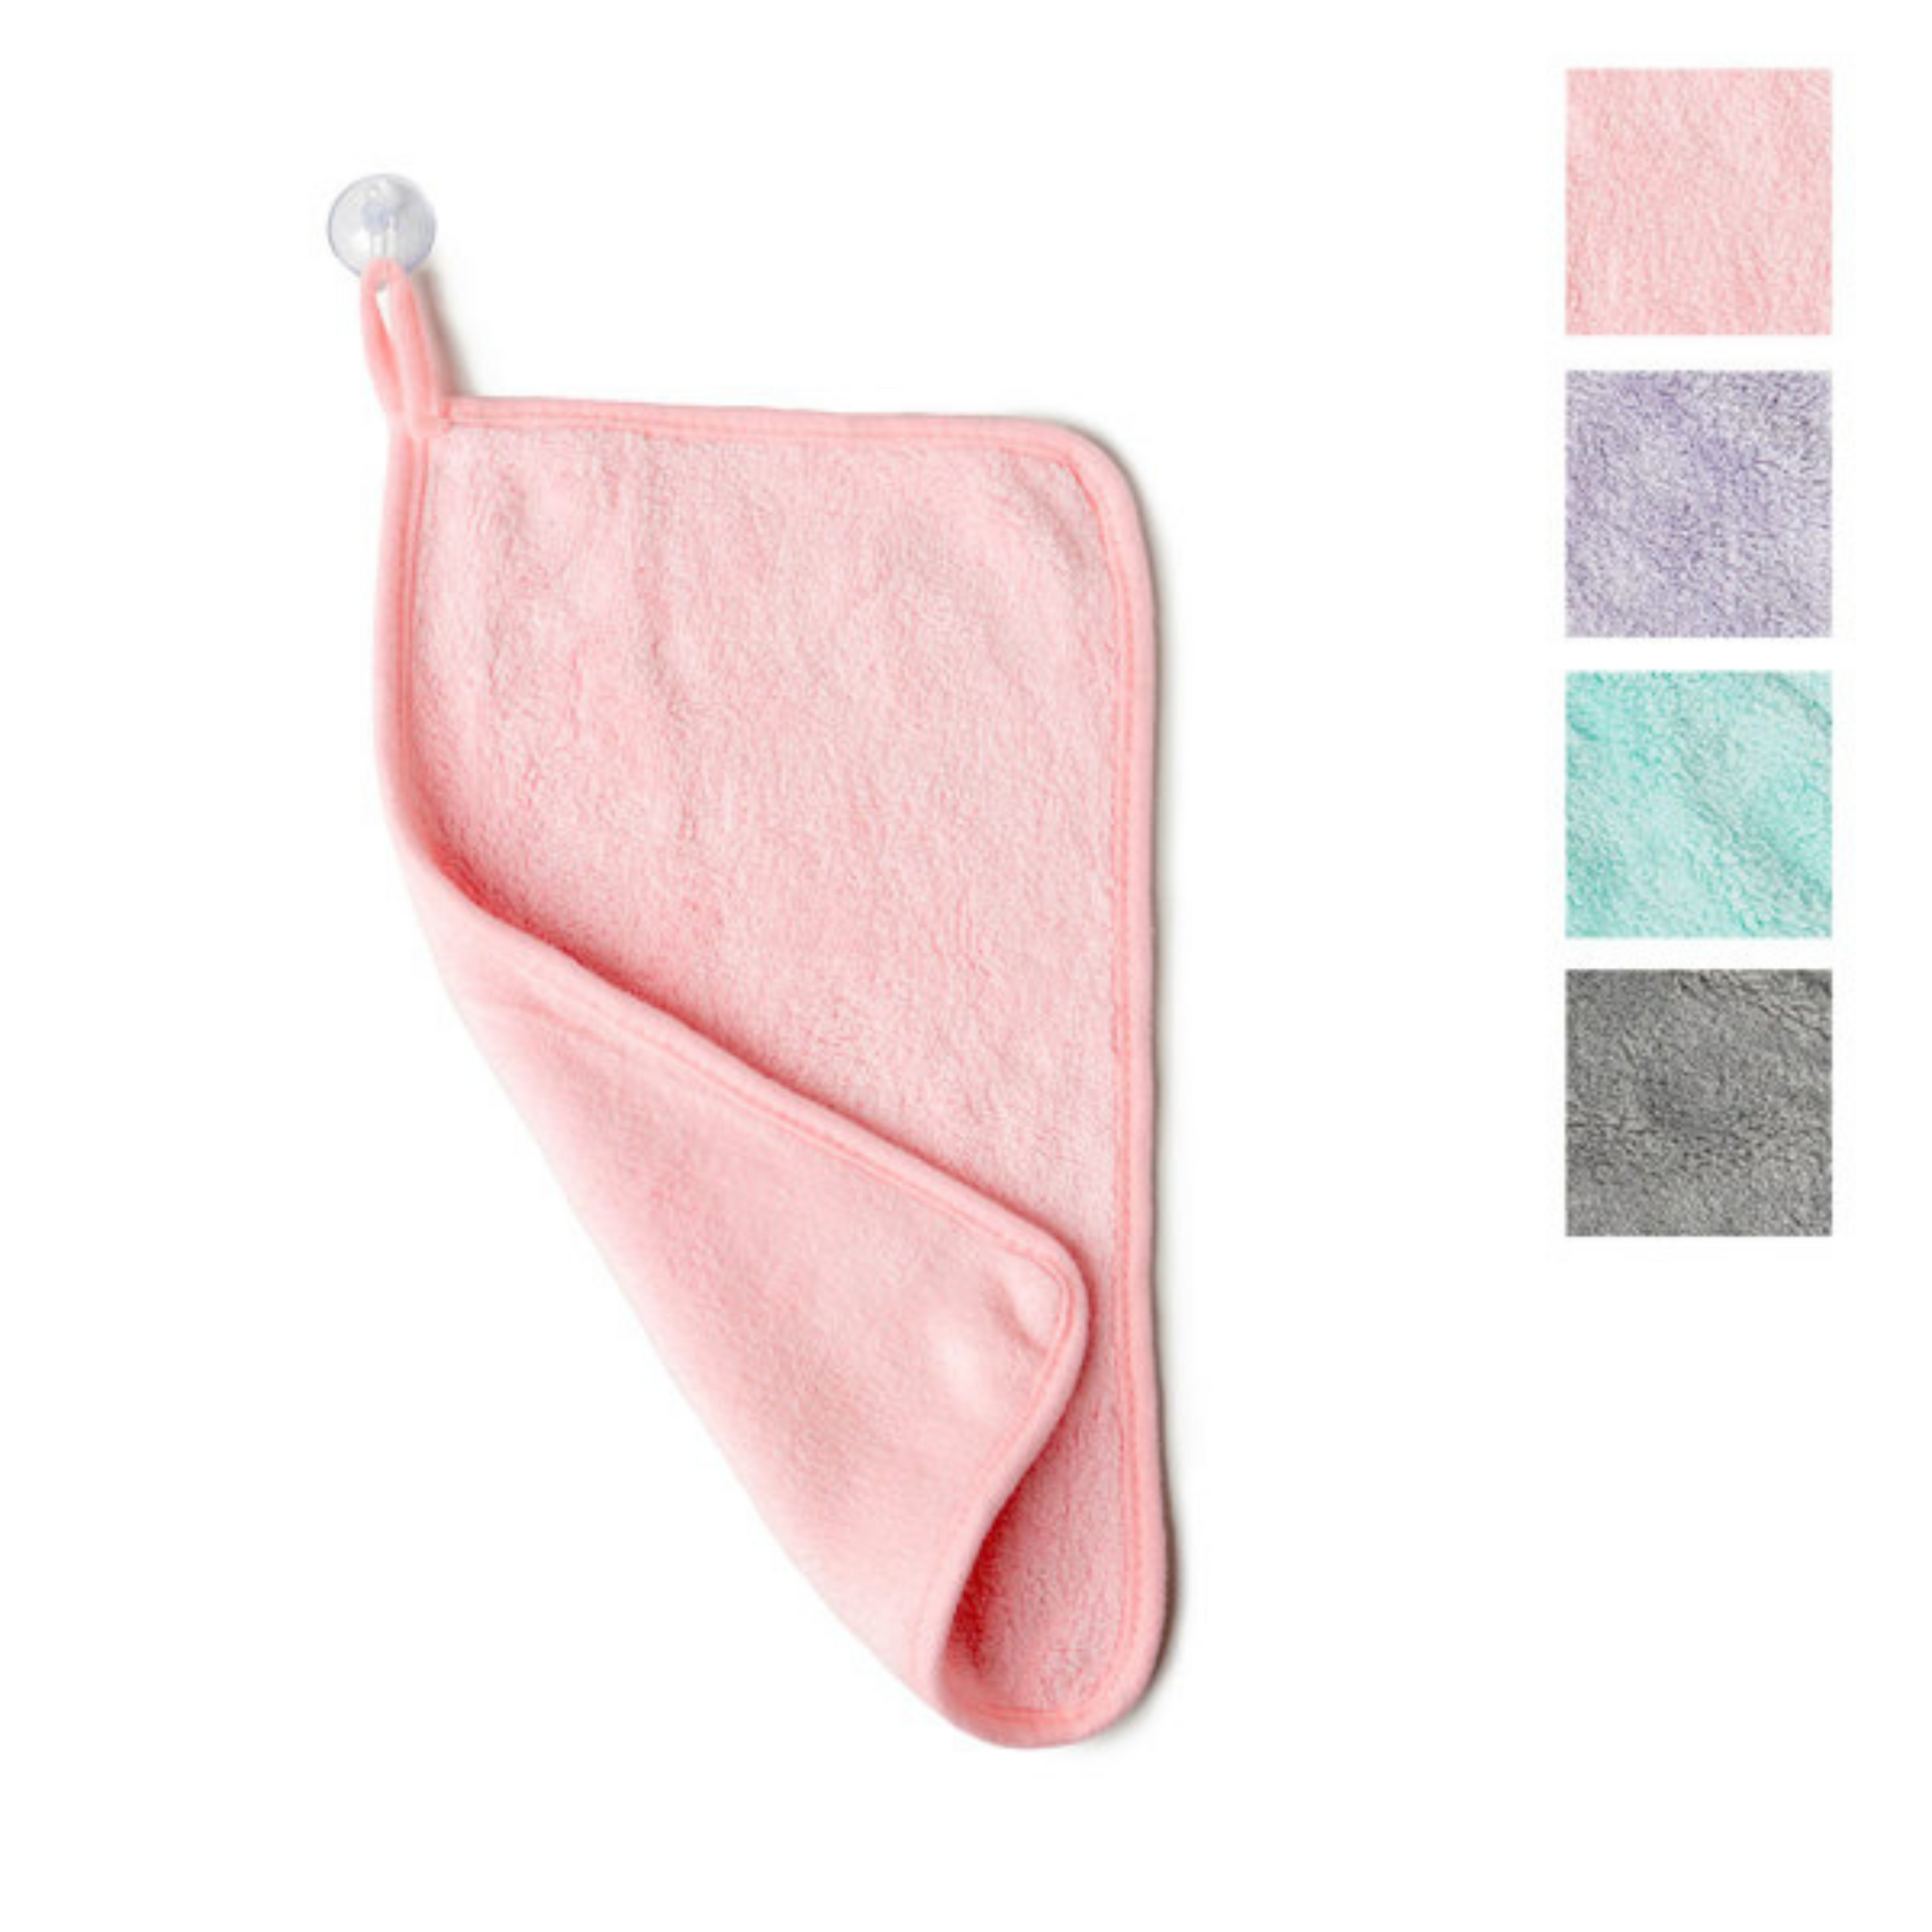 Effortlessly remove all types of makeup, even waterproof, with the Water Works Makeup Removing Towel. Its super soft fleece gently cleanses while being eco-friendly, budget-friendly and gentle for sensitive skin. With a built-in hanging loop and included mini suction cup and hook, it's convenient and machine washable. Available in four stylish colors.